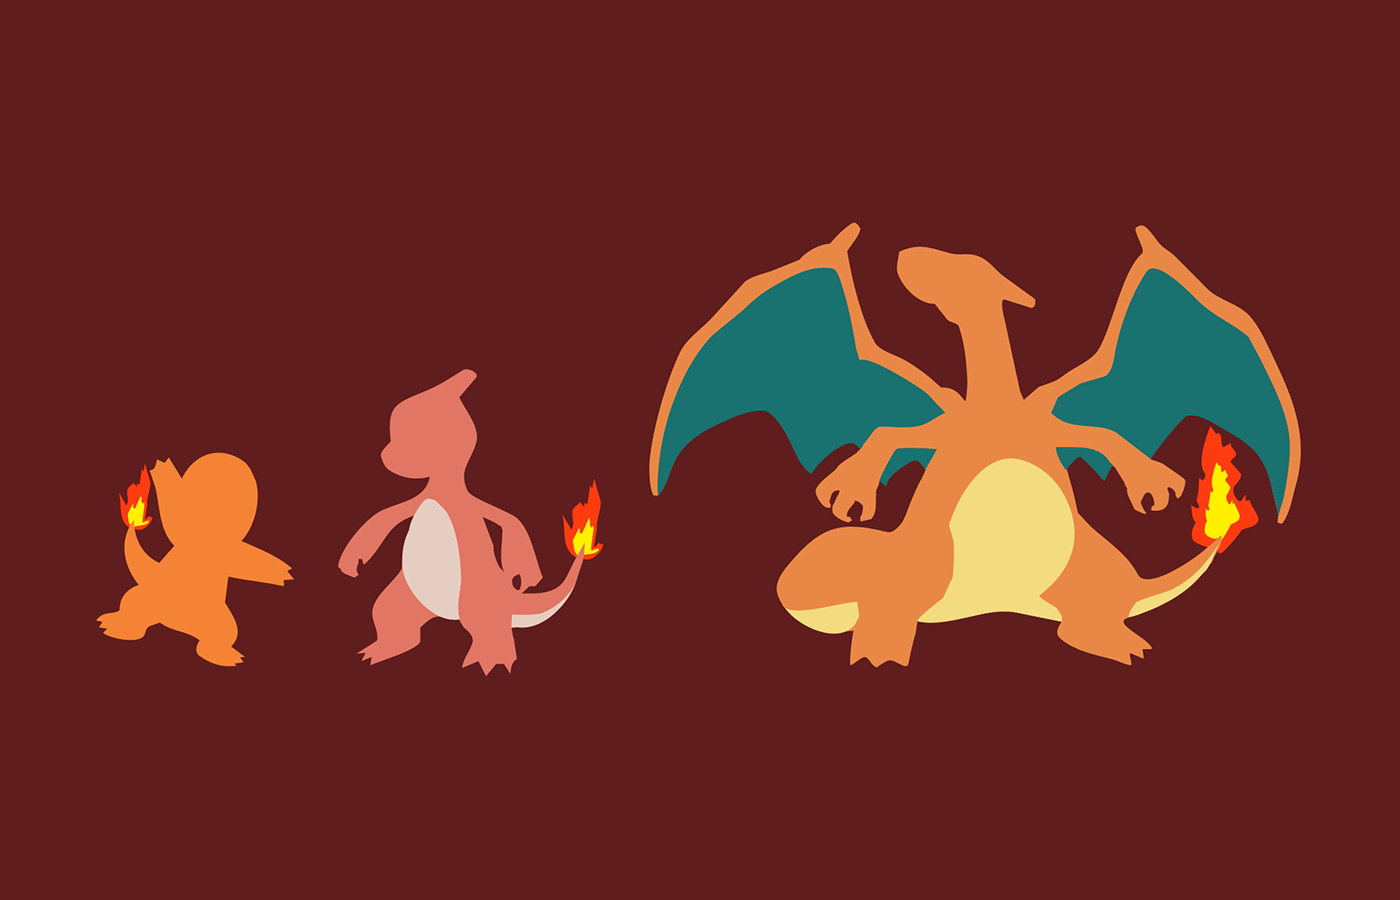 I Was Told You Guys Would Appreciate This - Pokemon Charizard Image Hd , HD Wallpaper & Backgrounds